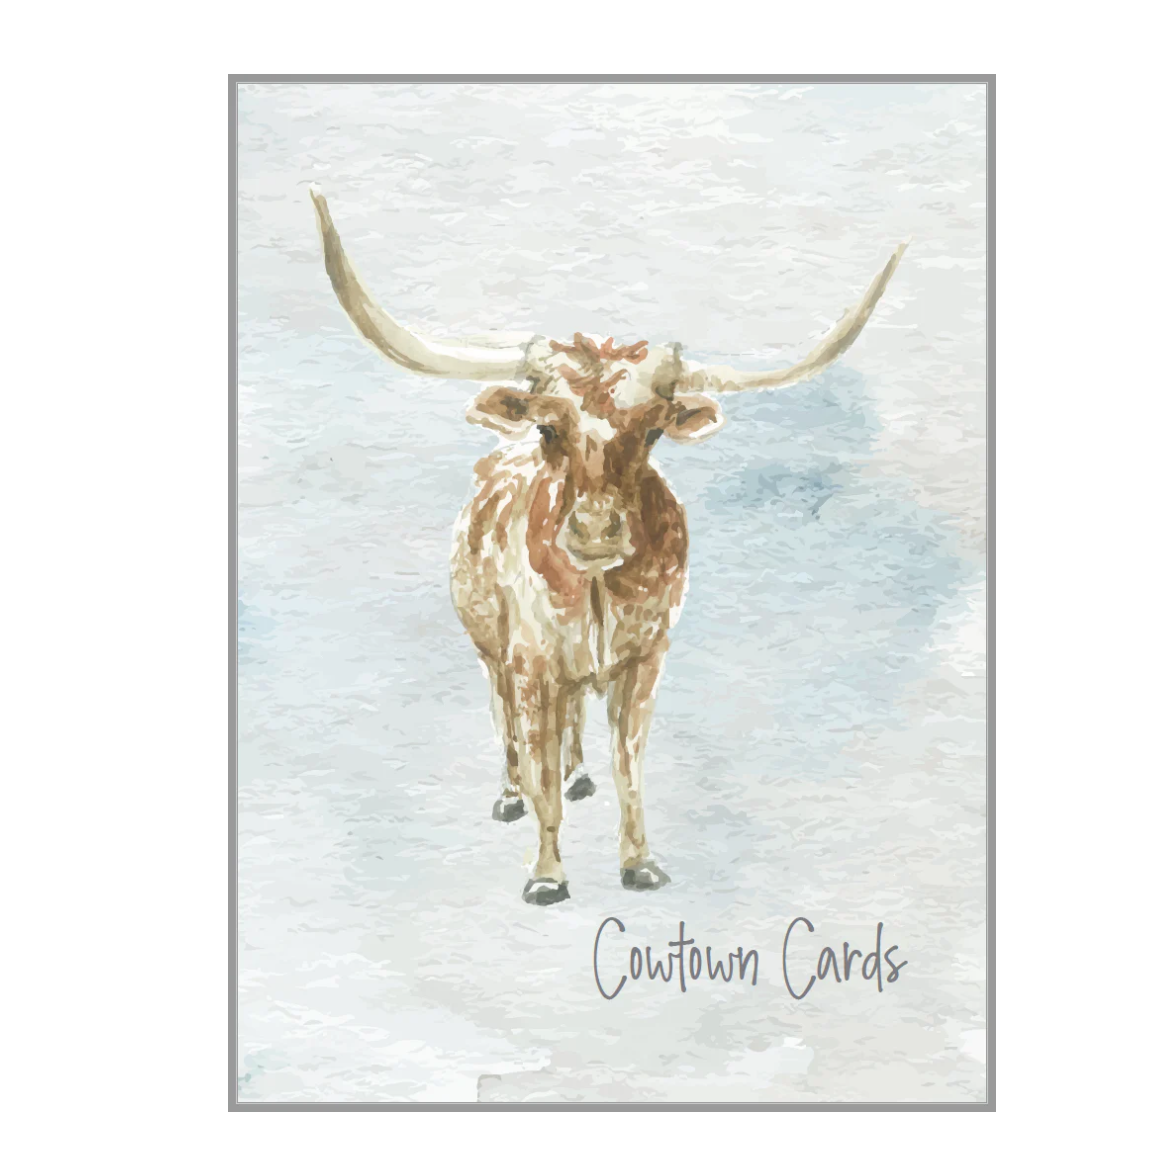 Cowtown Cards